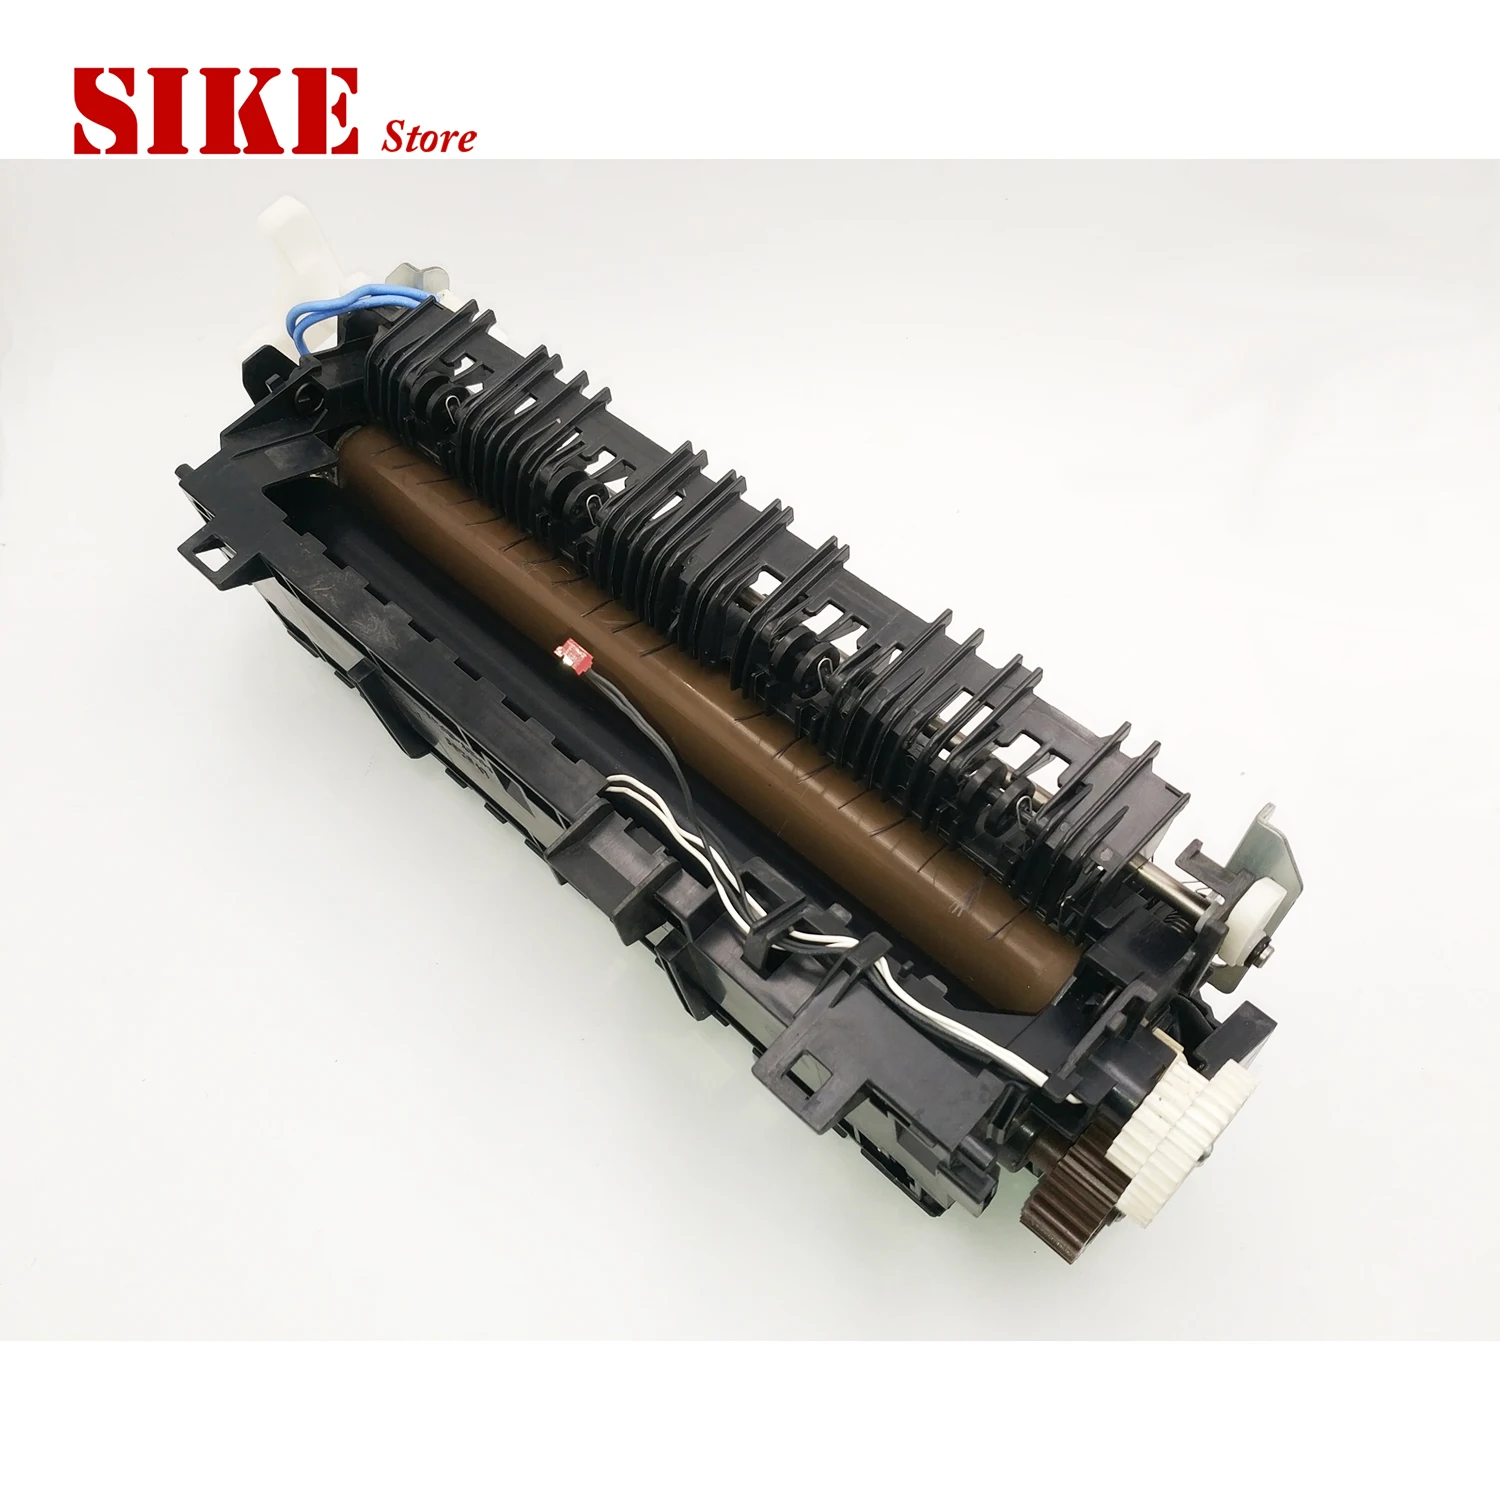 Assy  Brother DCP-8152DN DCP-8155DN DCP 8152 8155 8157 8152DN Fuser Assembly LY5610001 LU9215001